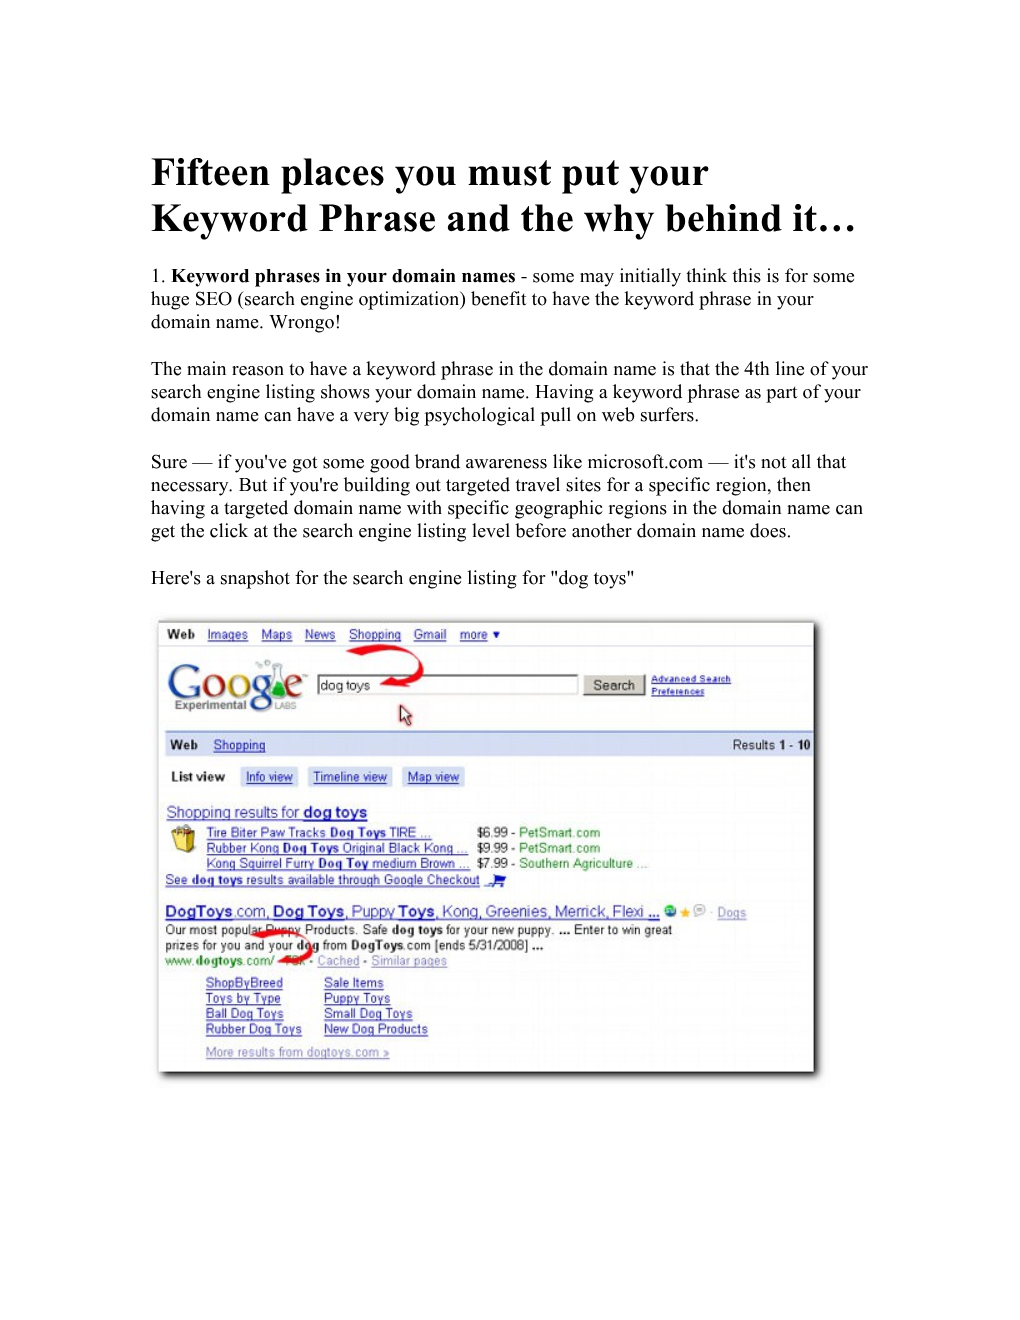 Fifteen Places You Must Put Your Keyword Phrase and the Why Behind It